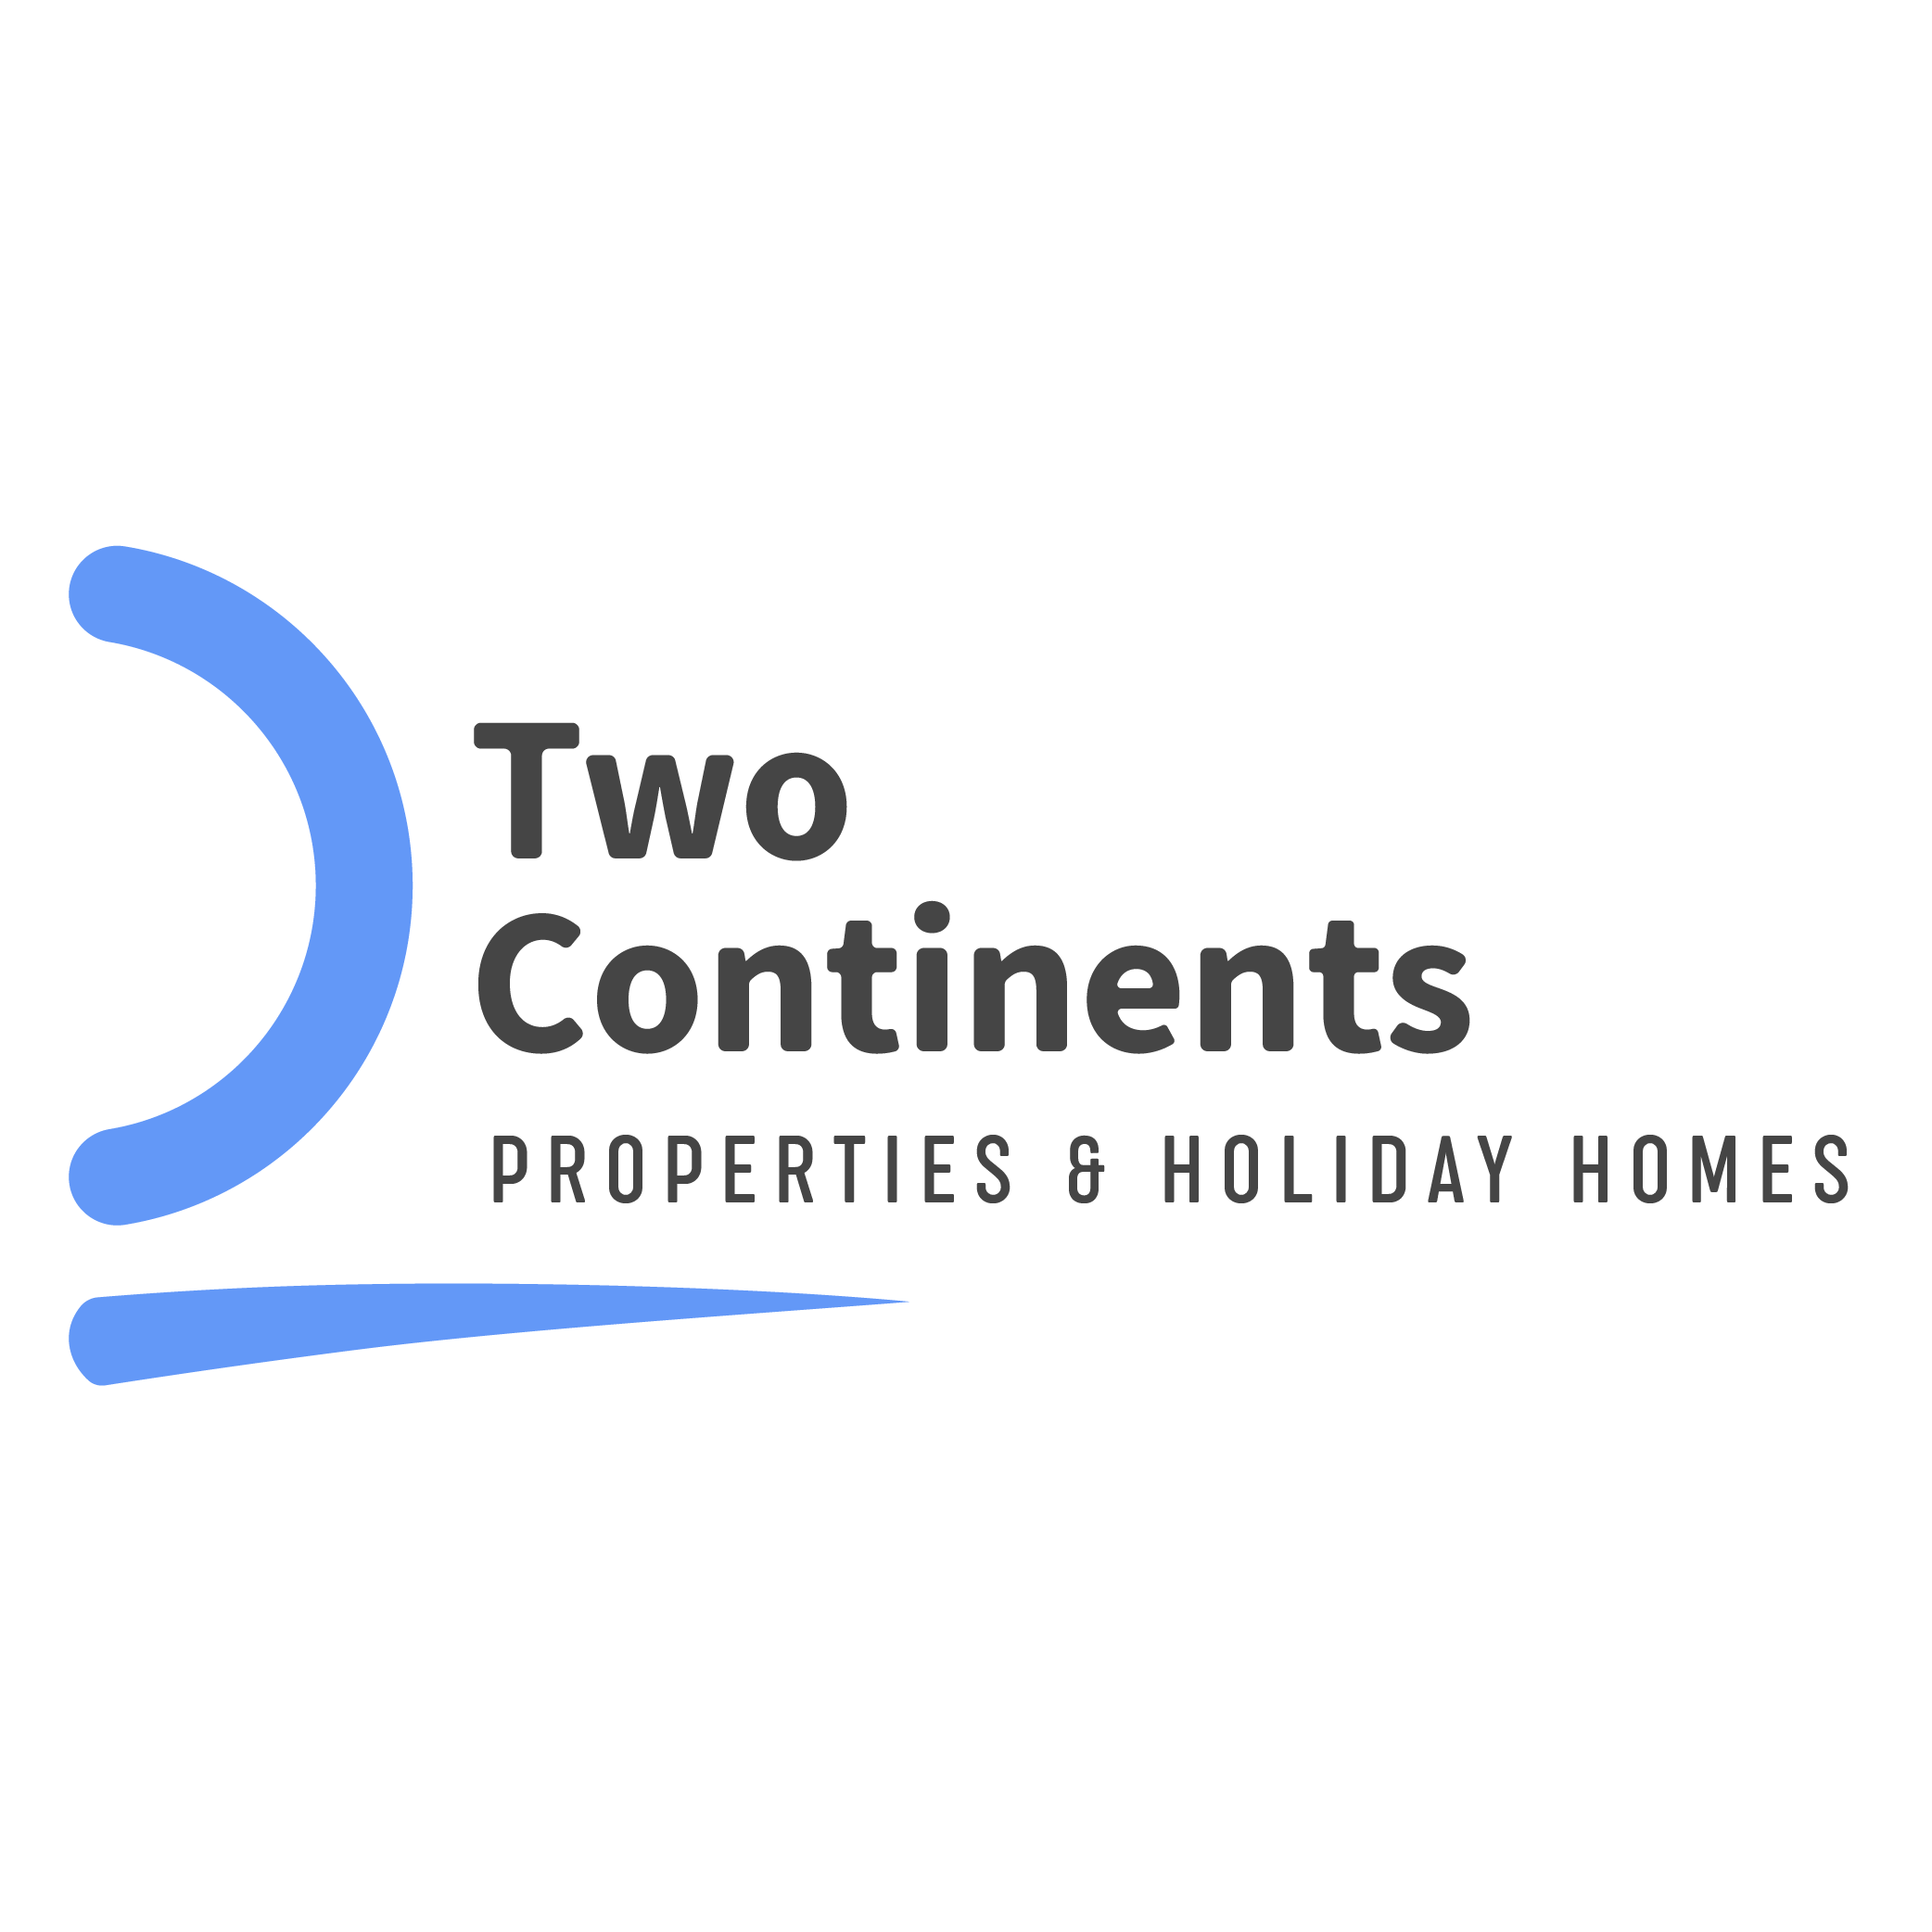 Two Continents Holiday Homes